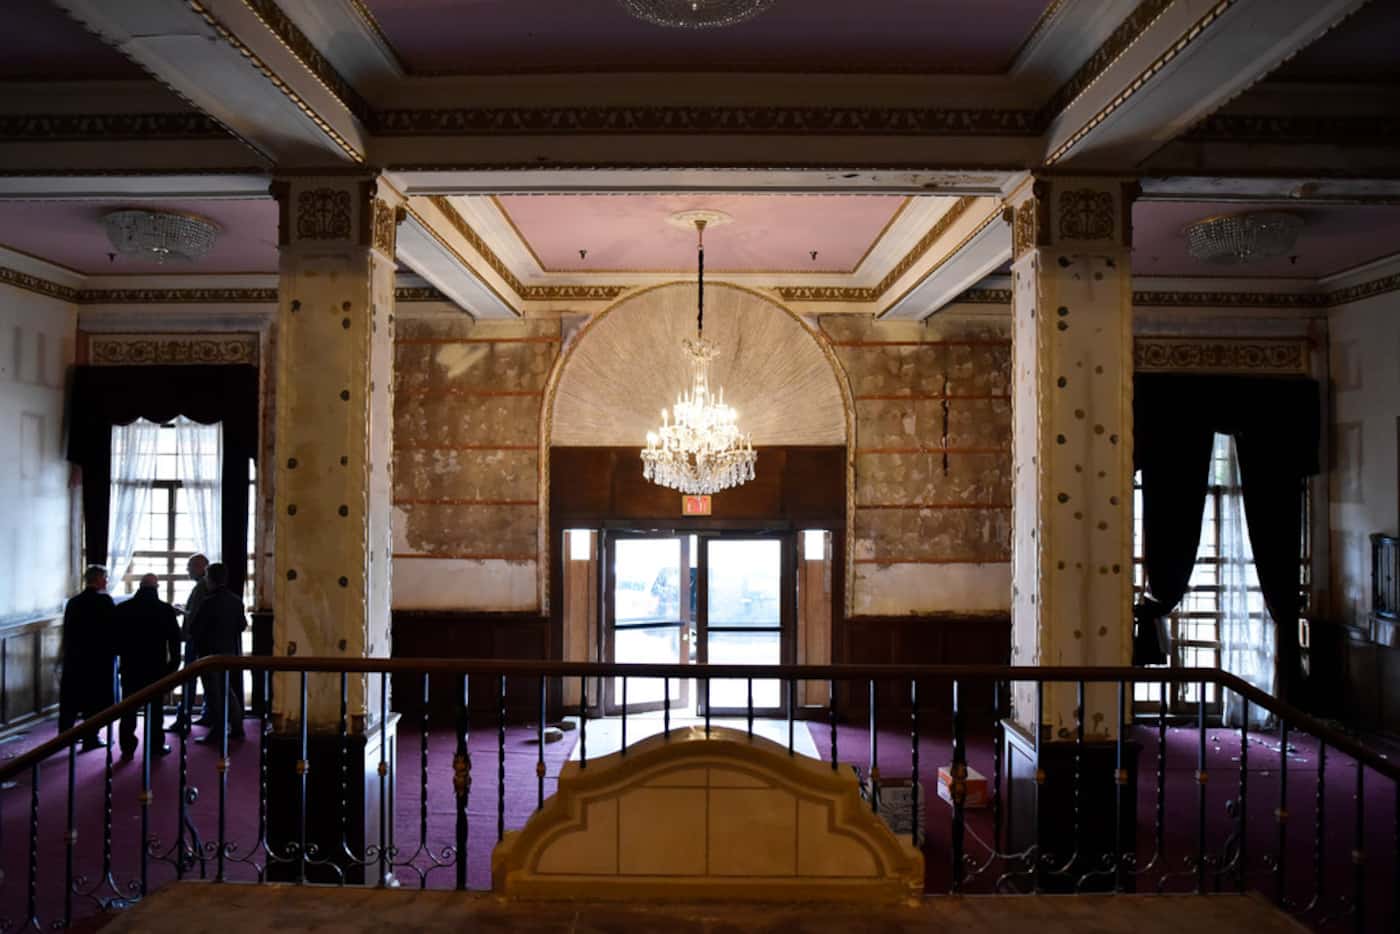 The main lobby of the Ambassador as it looked last week